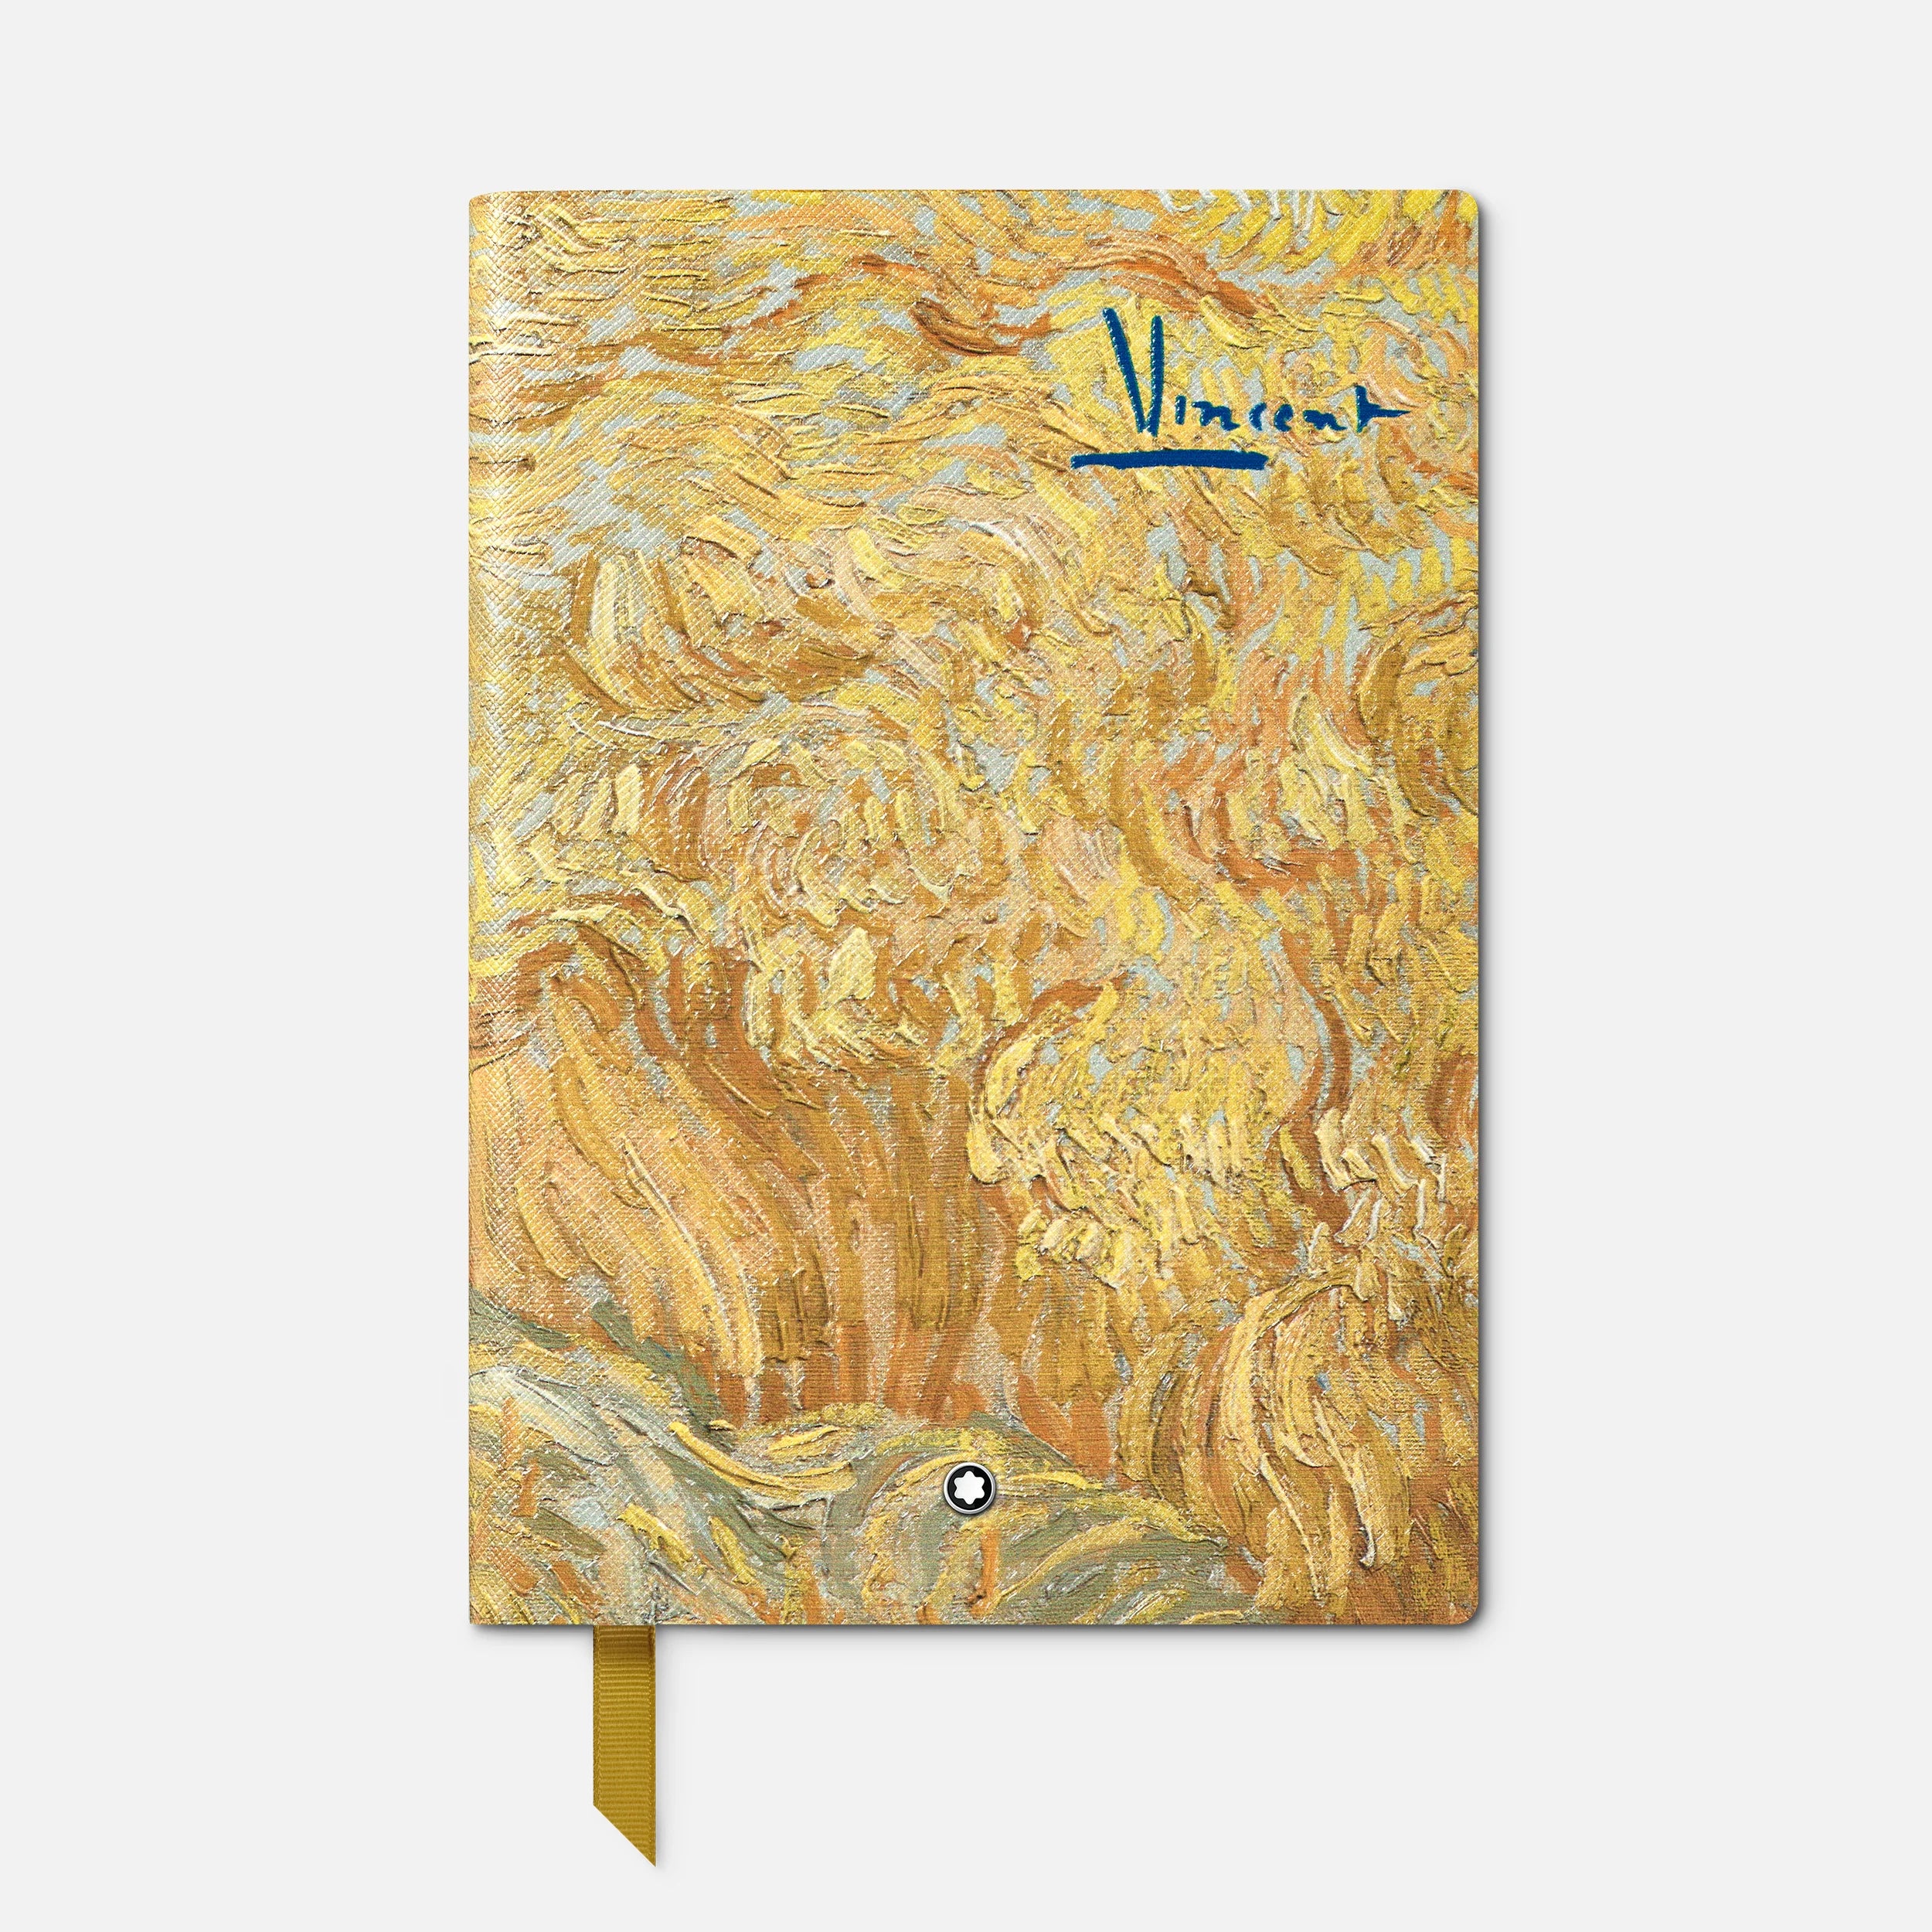 MONTBLANC | Blocco note #146 piccolo, Homage to Vincent Van Gogh | MB130284